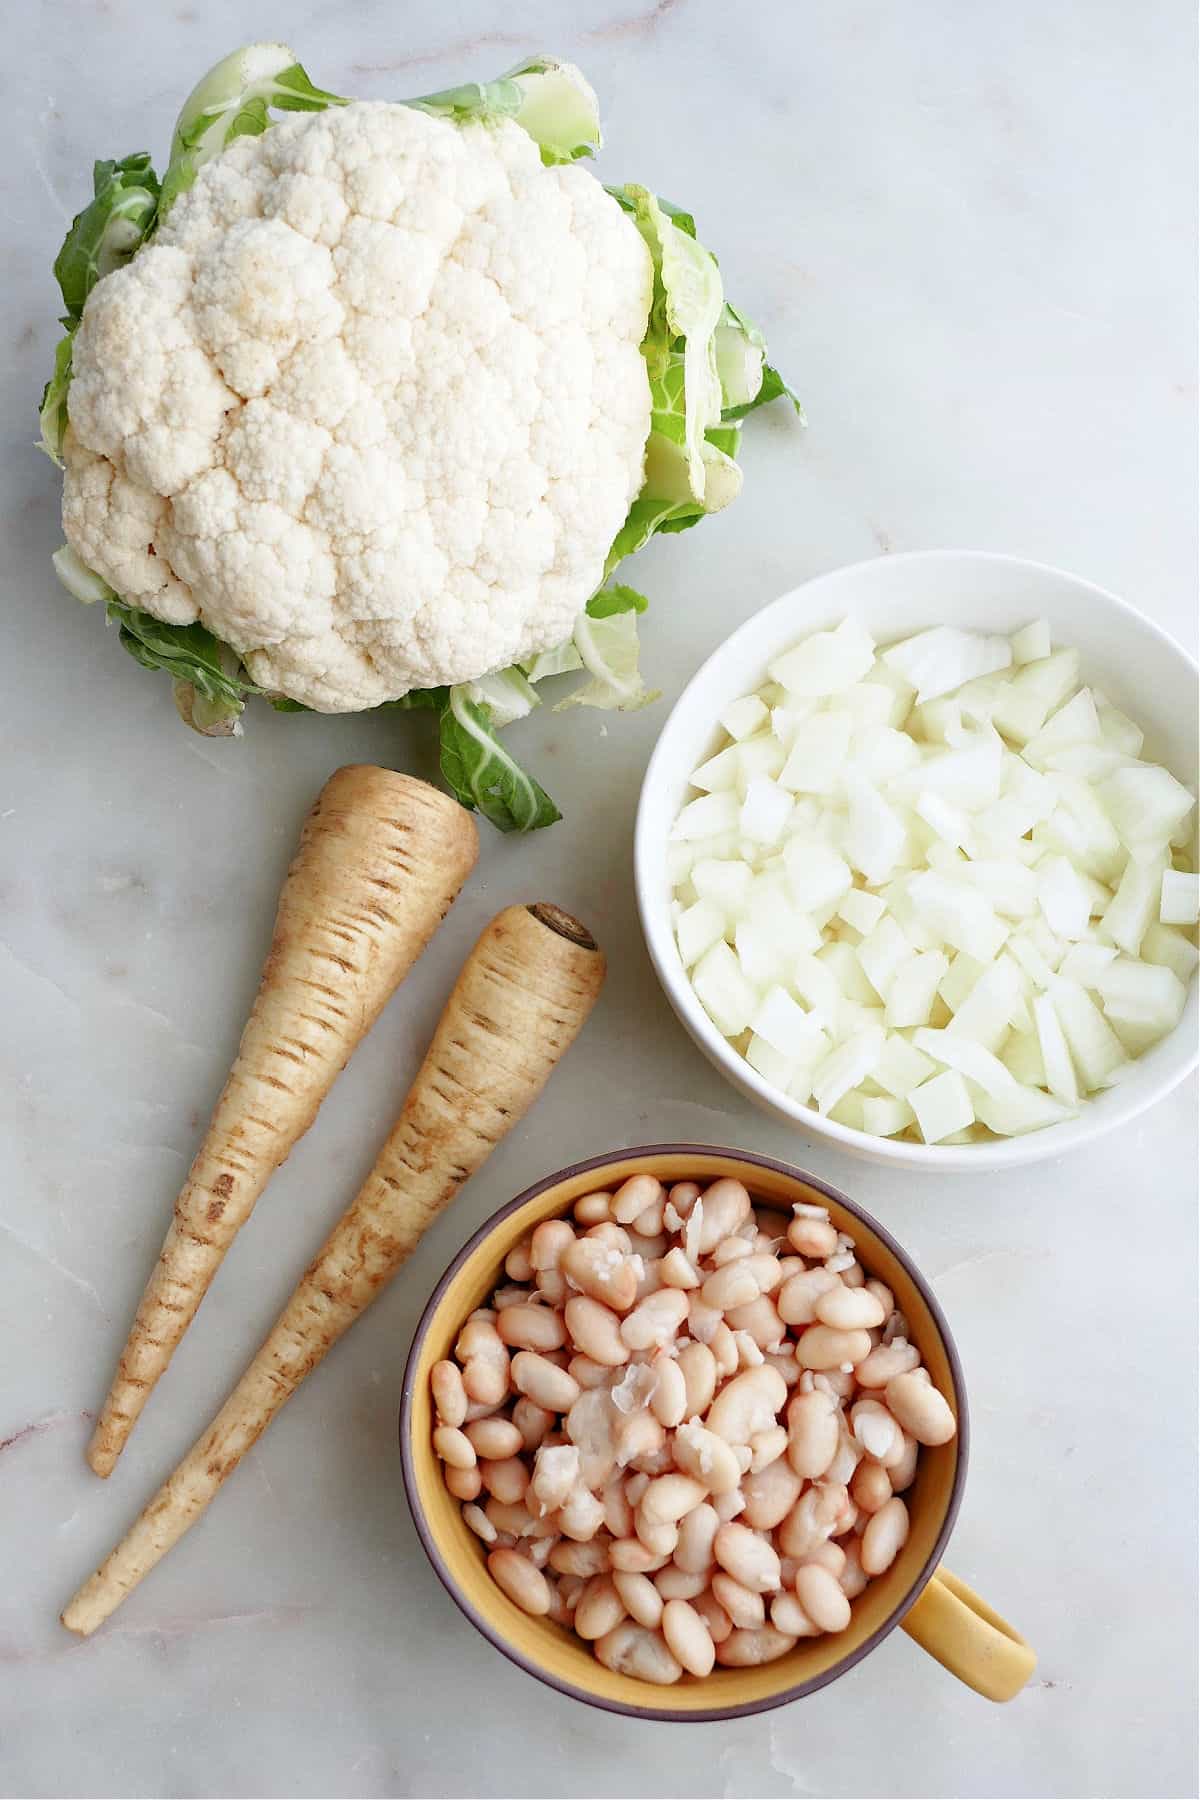 cauliflower, two parsnips, diced onion, and white beans next to each other on a counter